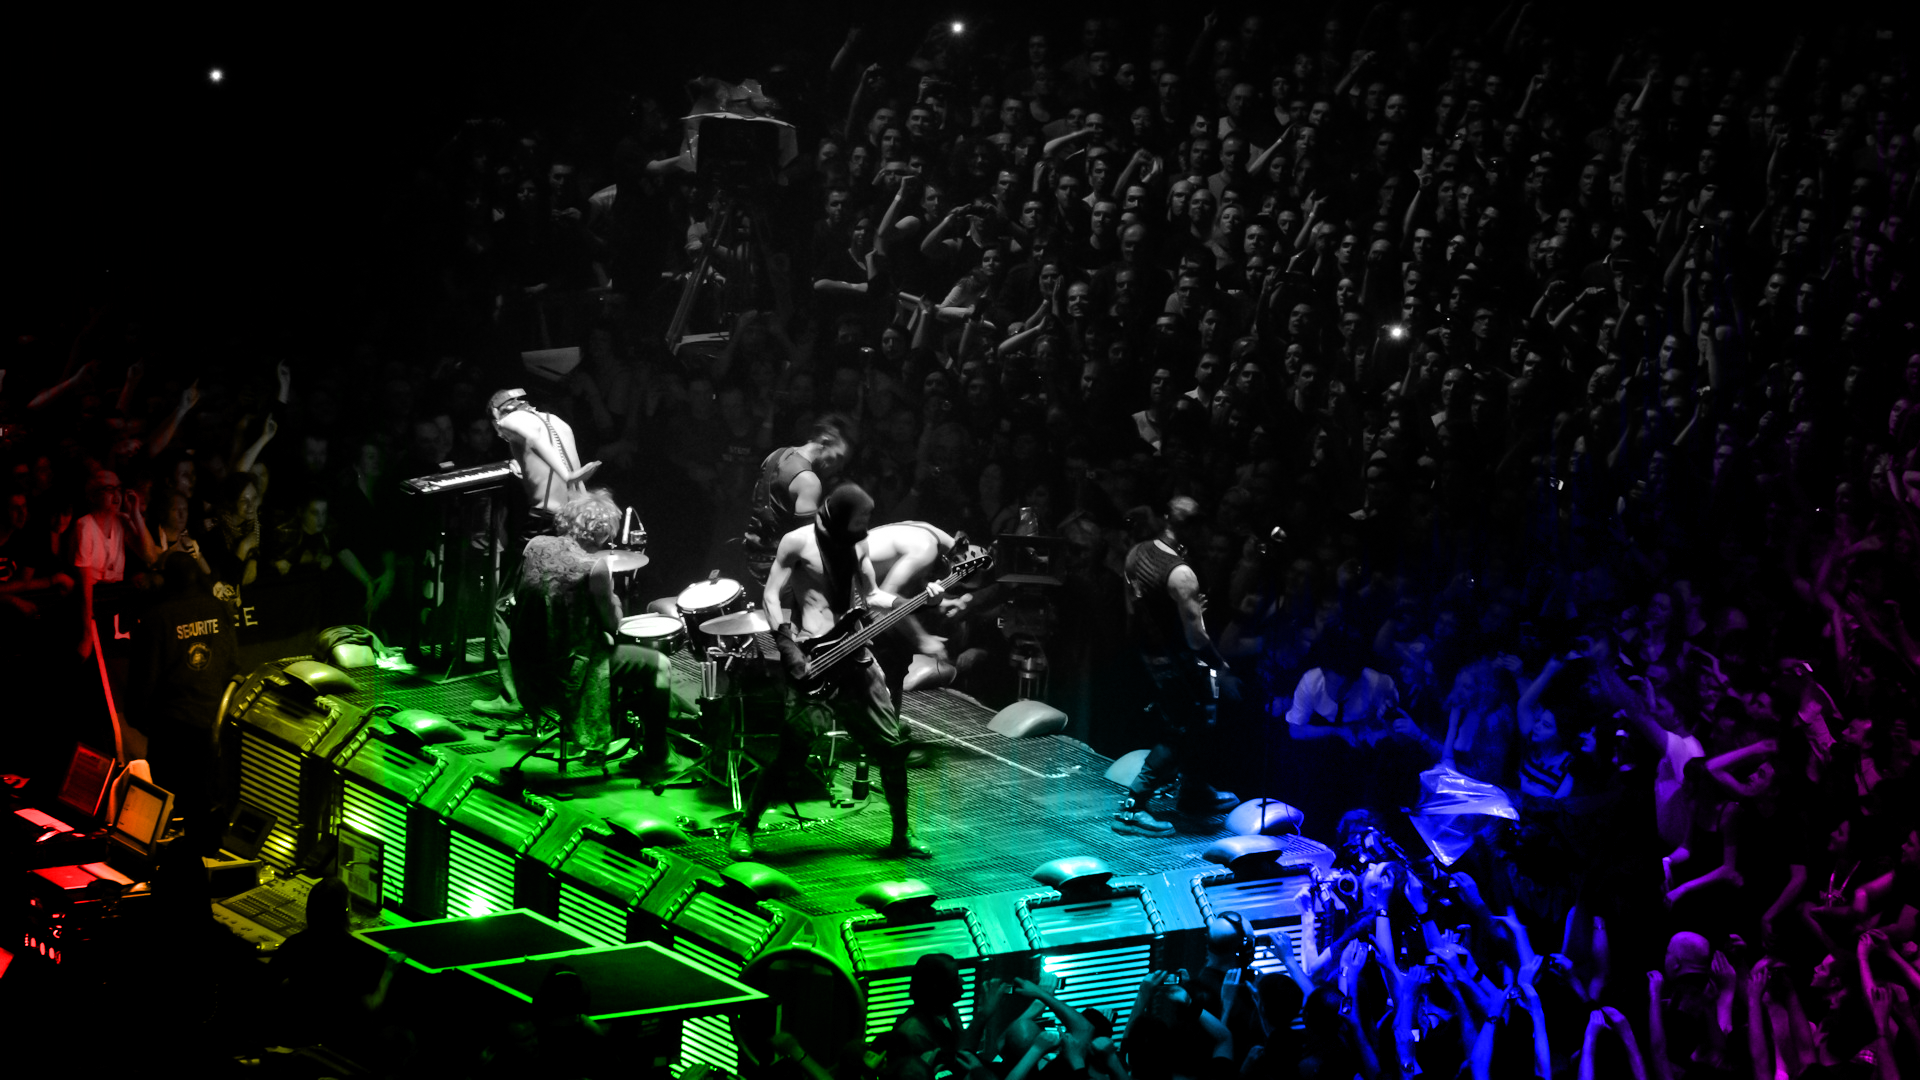 Colorful Concert Music Rammstein 1920x1080